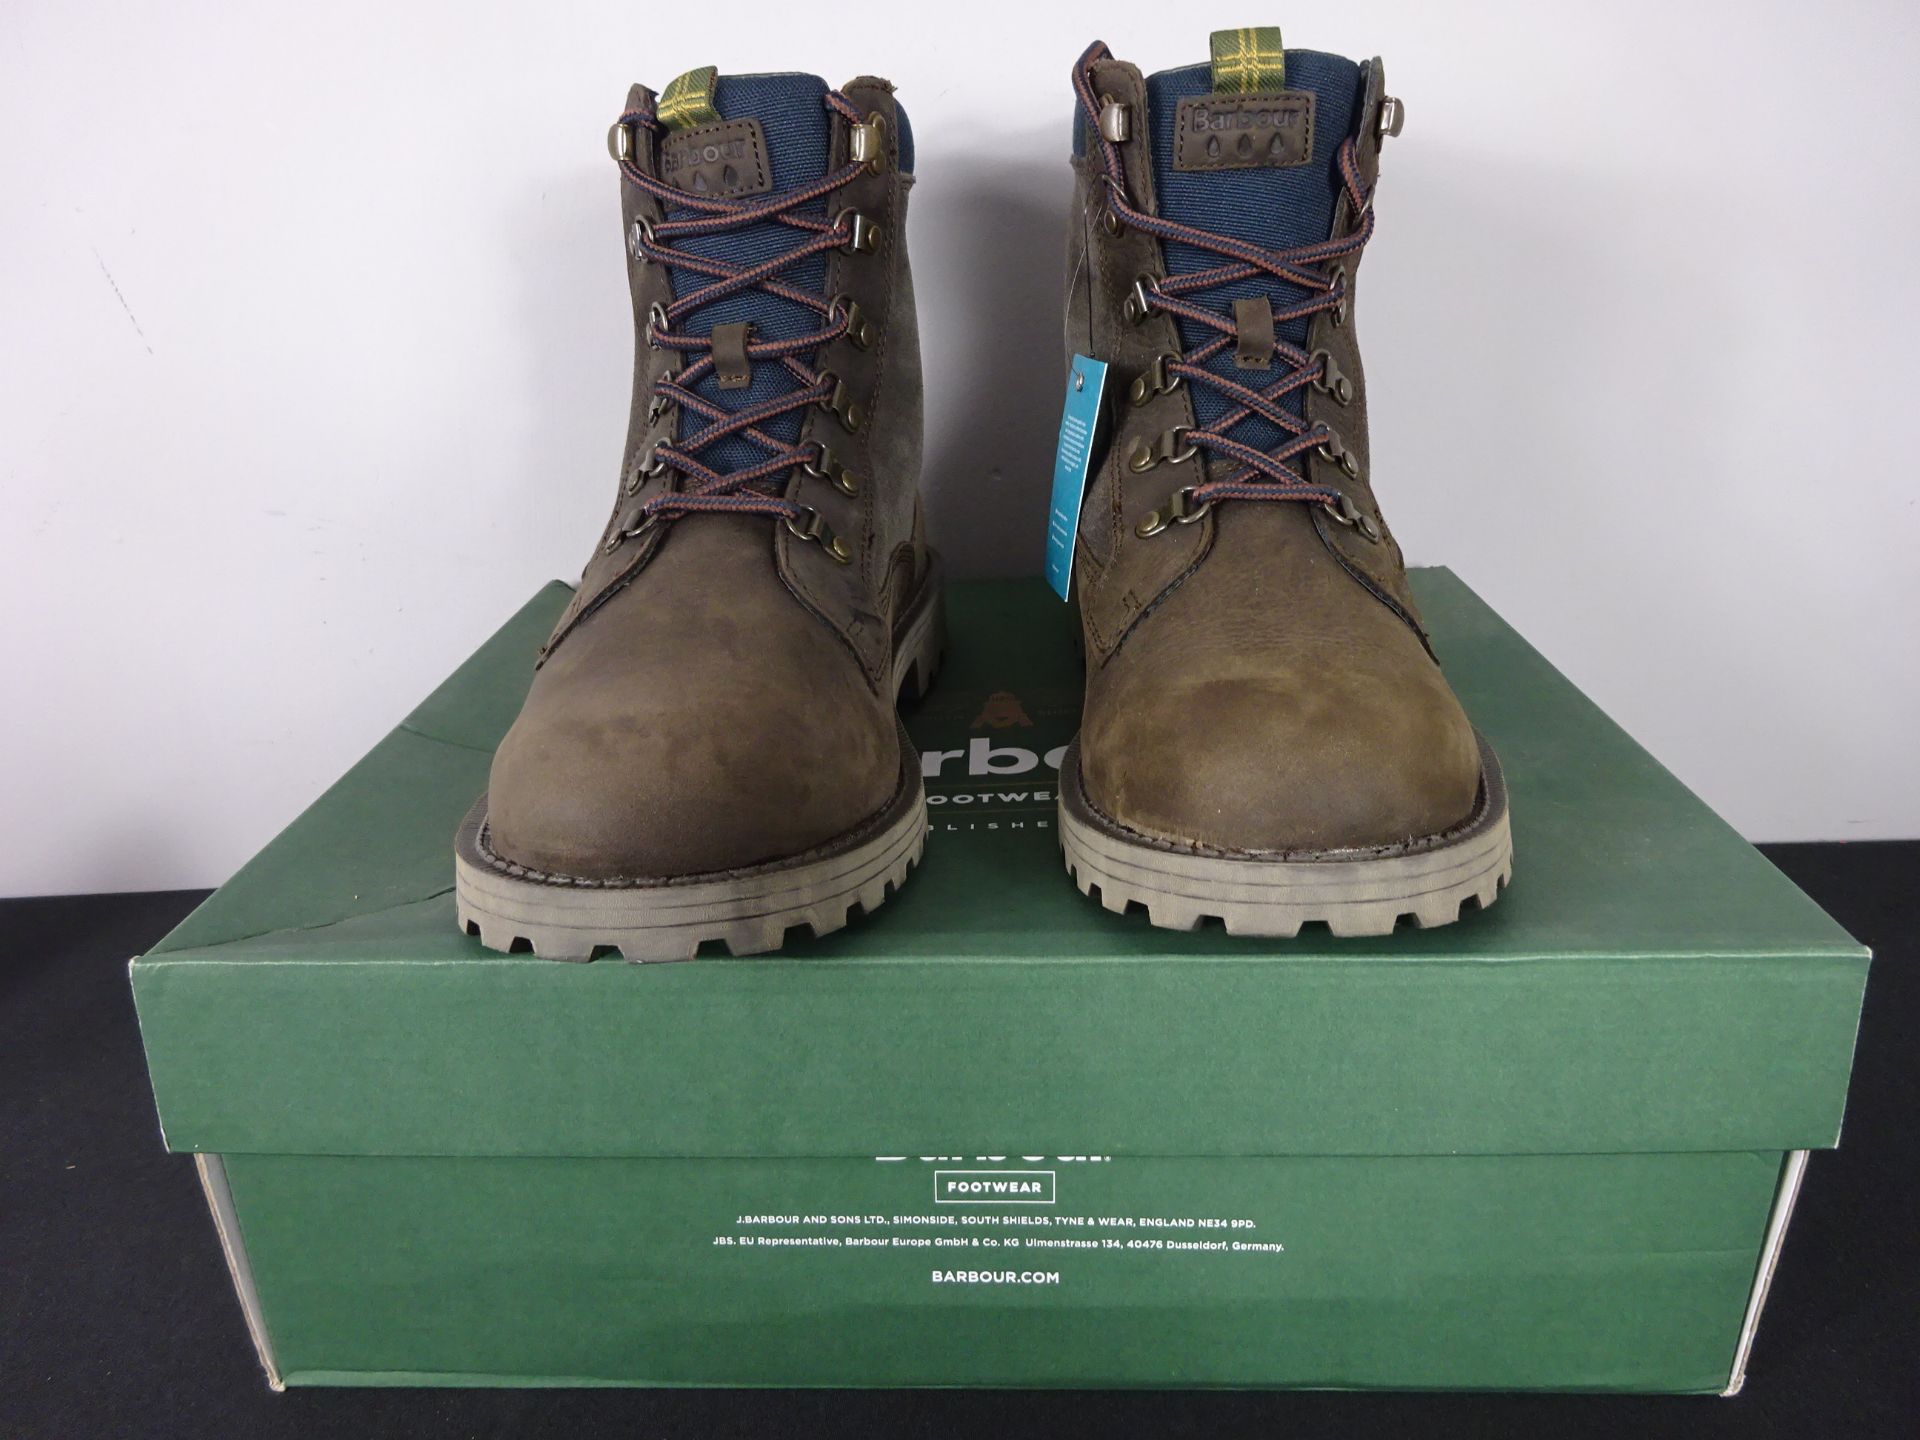 RRP £129.99 - New Barbour Chiltern Boots - Size 6. - Image 2 of 3